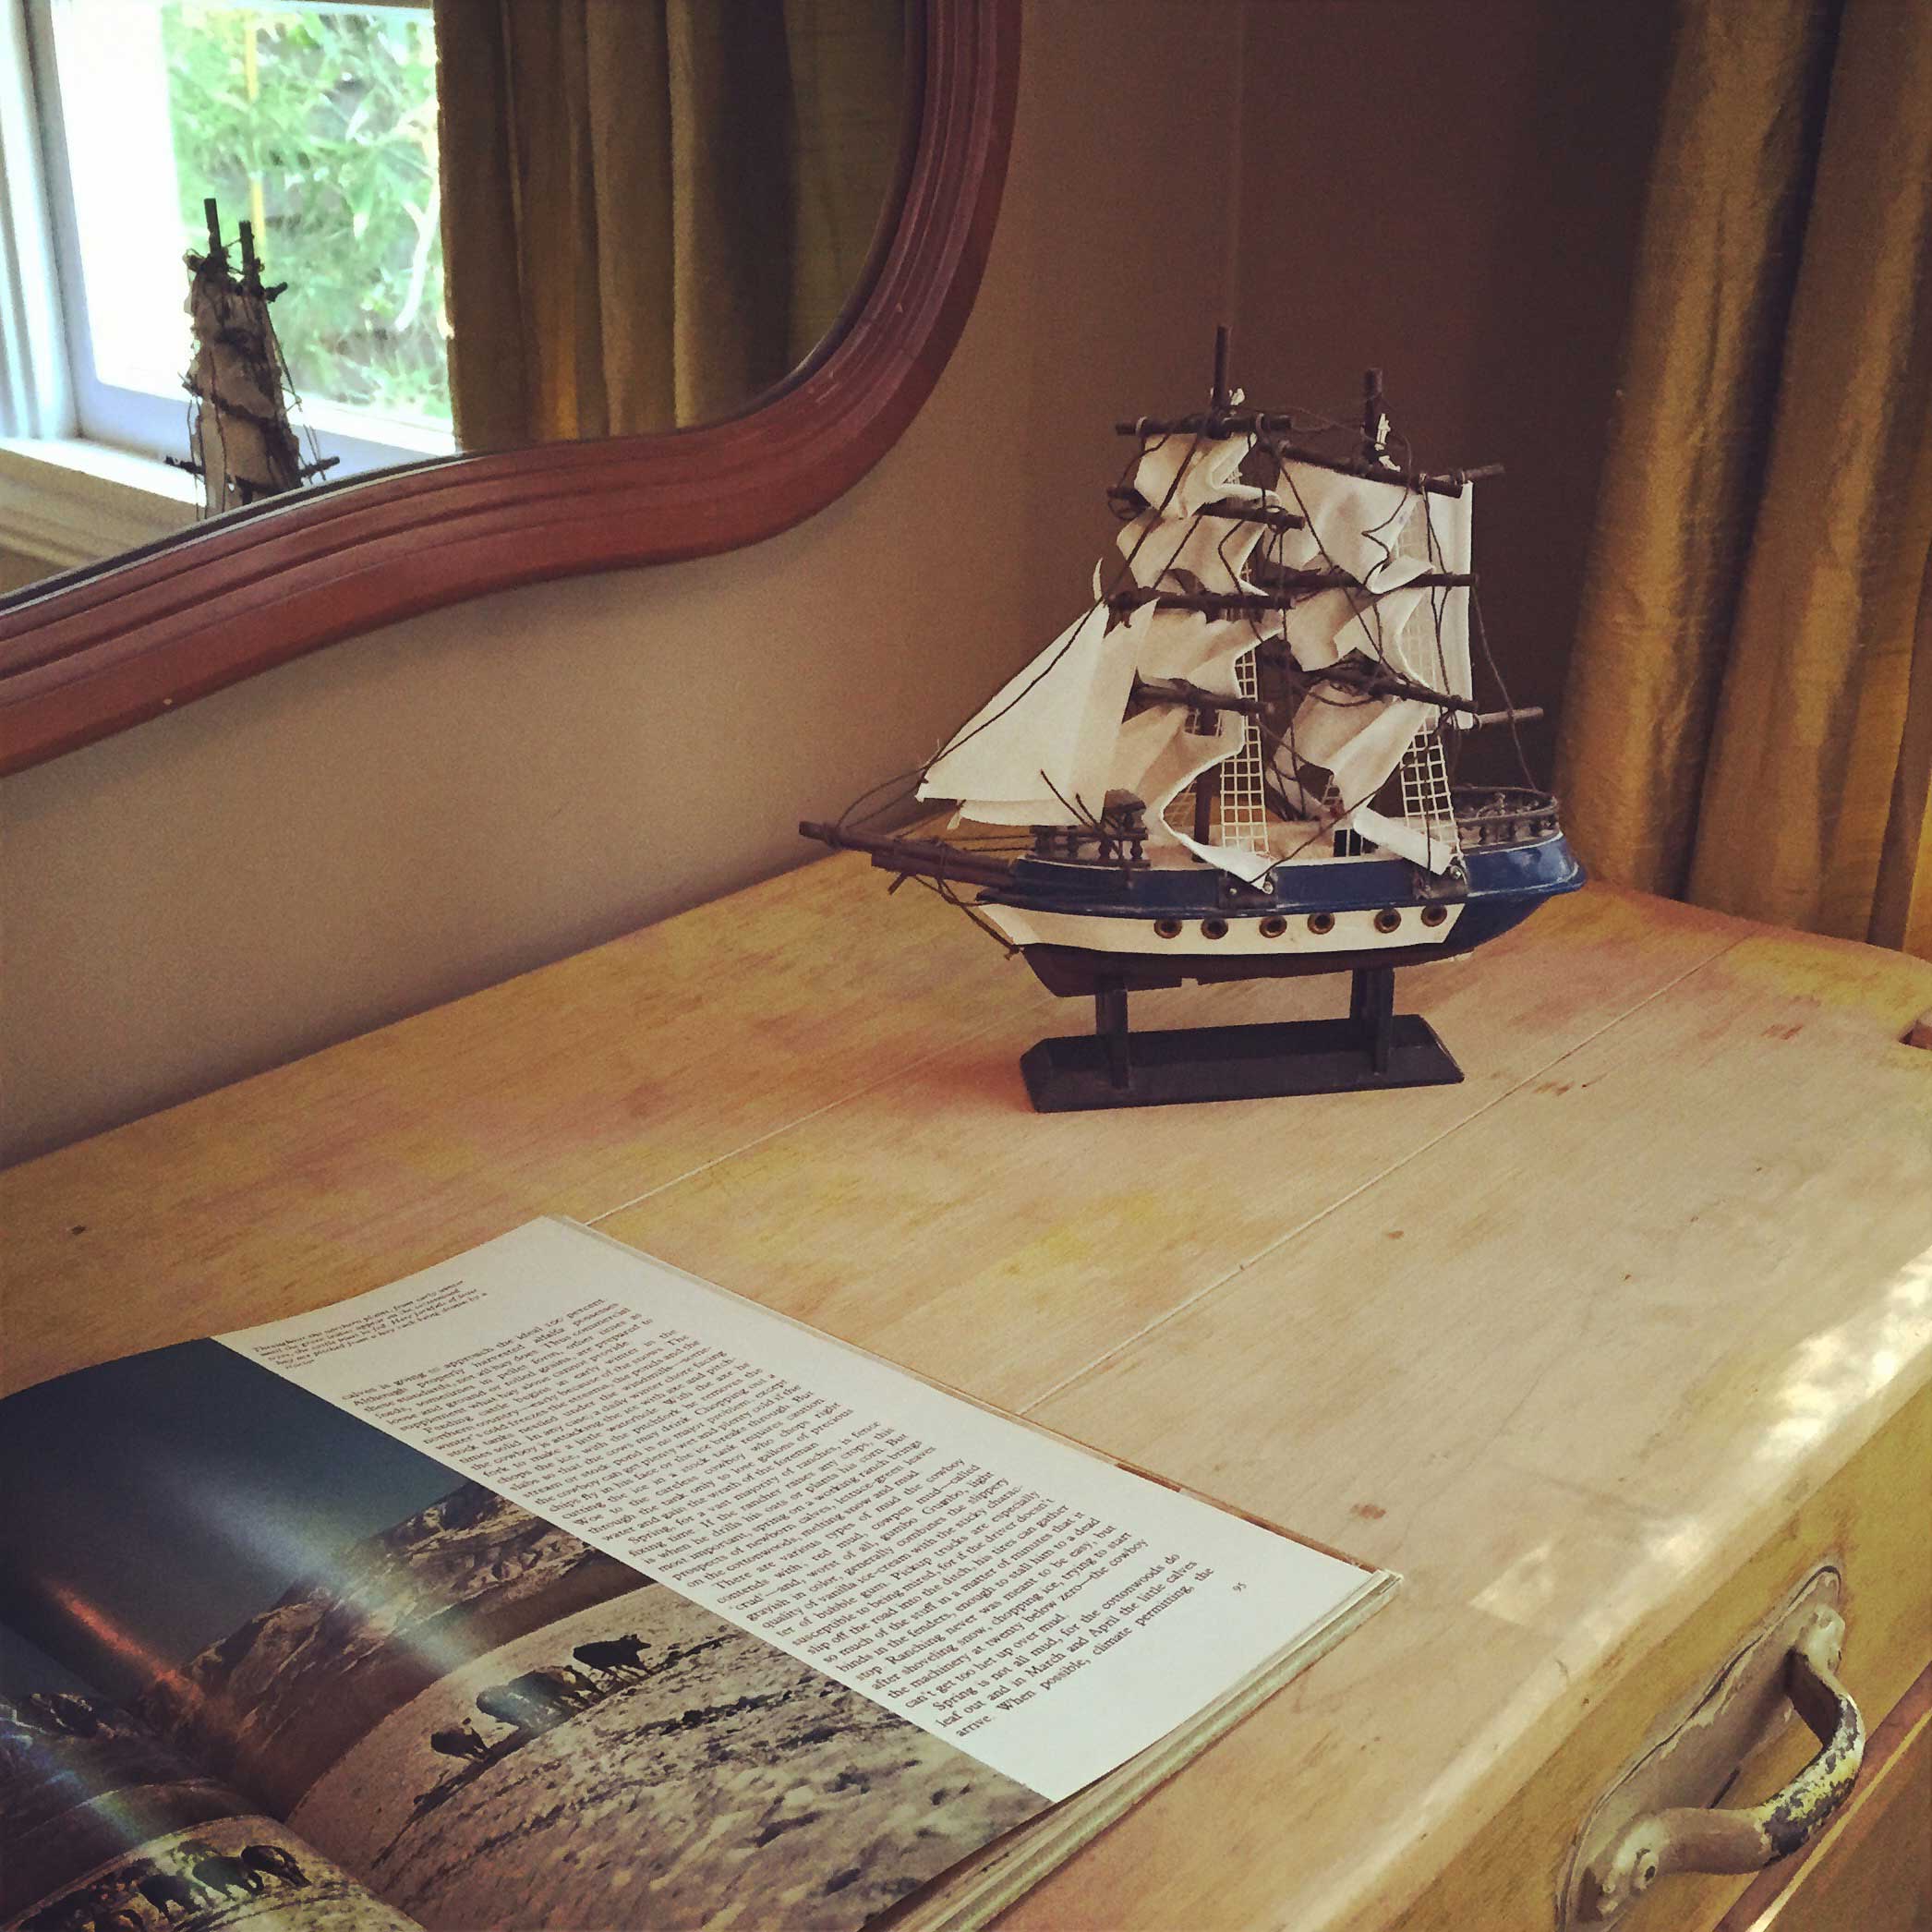 This is the SECOND boat prop in the house! Boat imagery must be very key to selling a house!